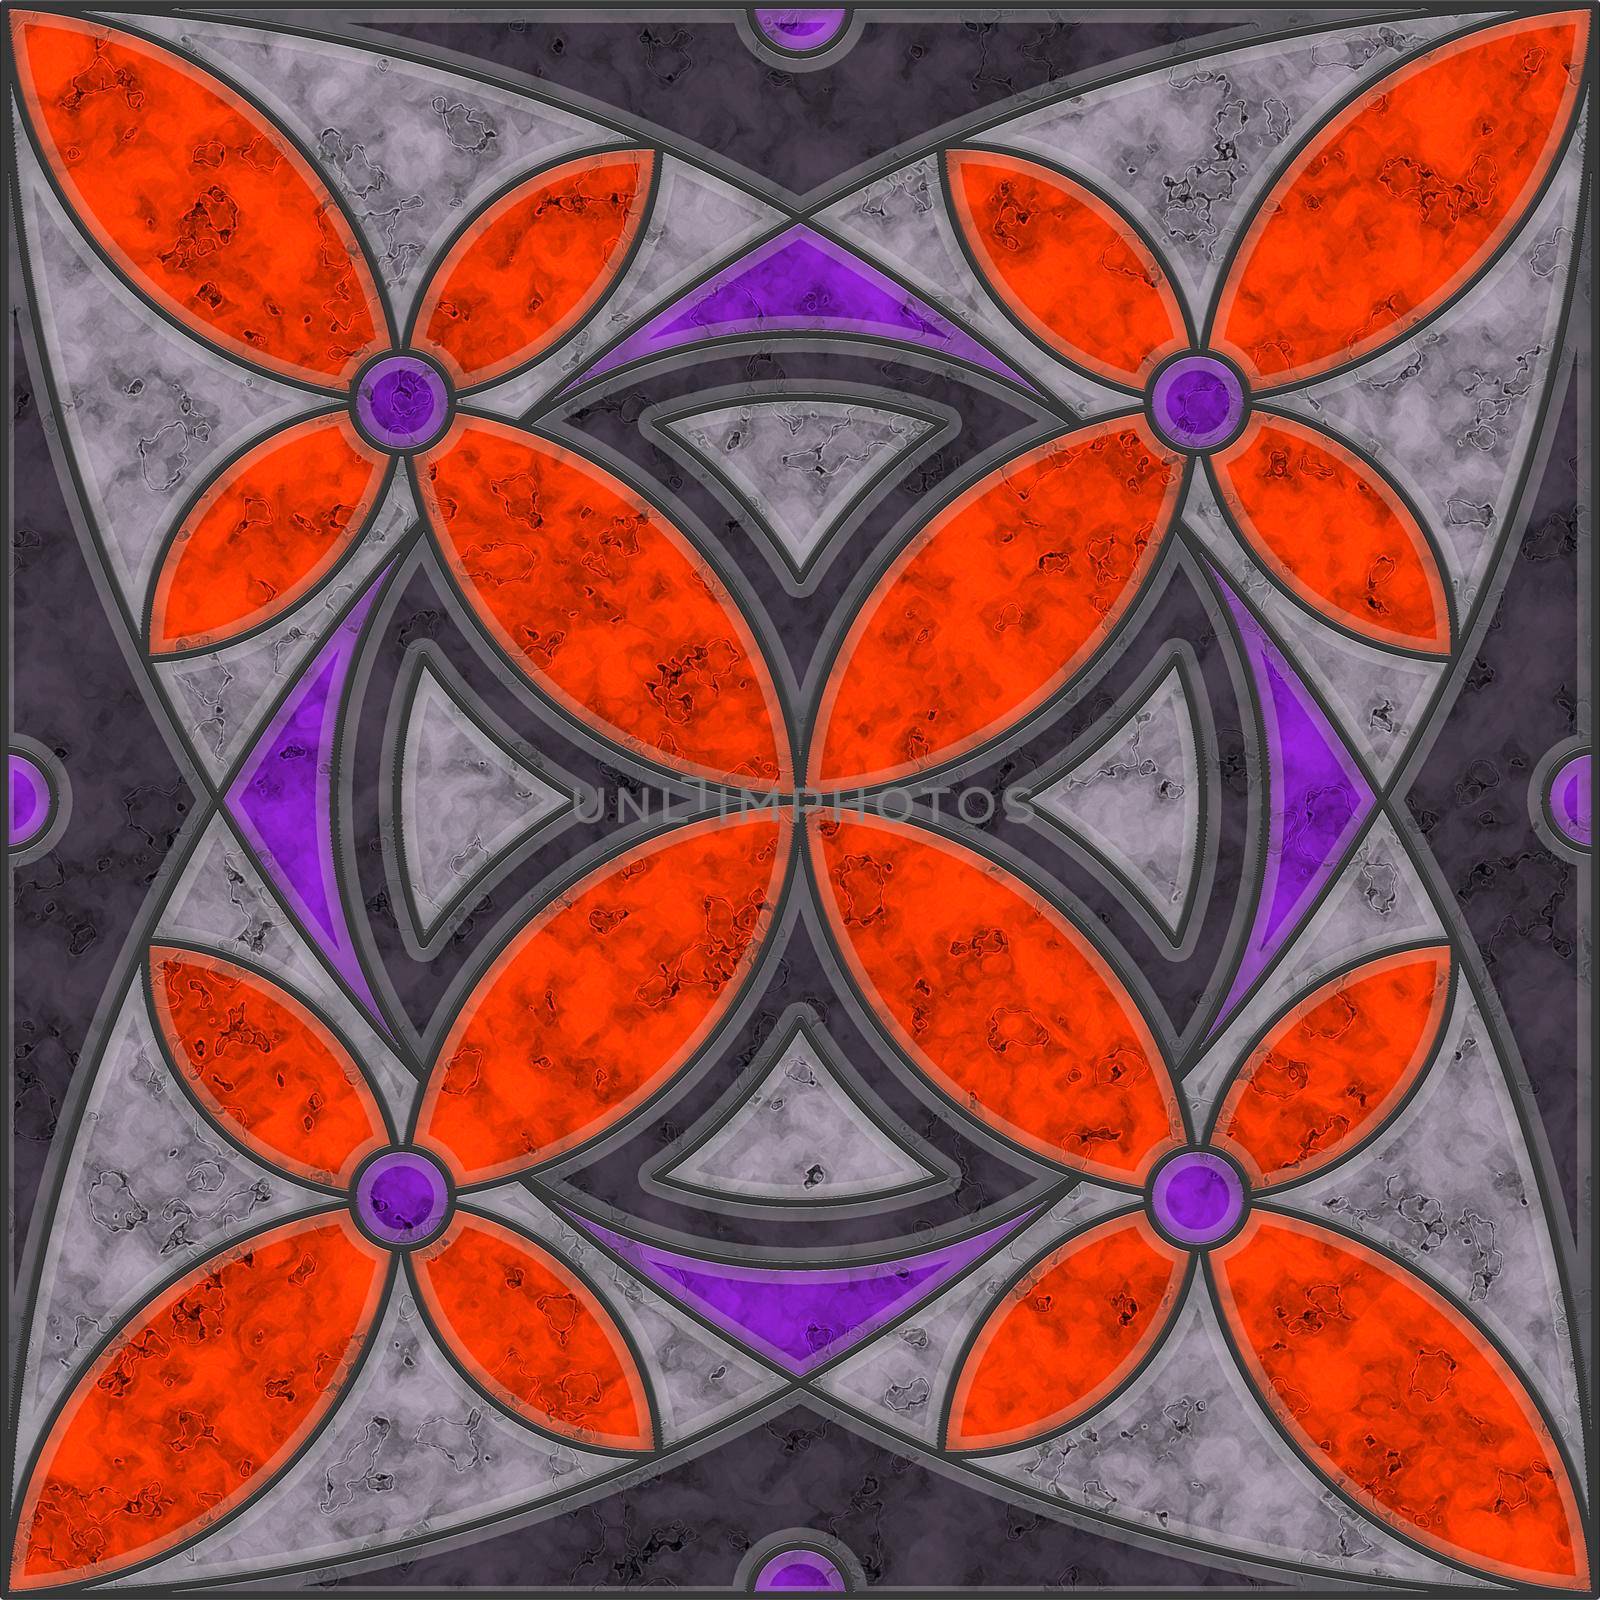 Orange, violet and grey marble tile with flower pattern by Bezdnatm